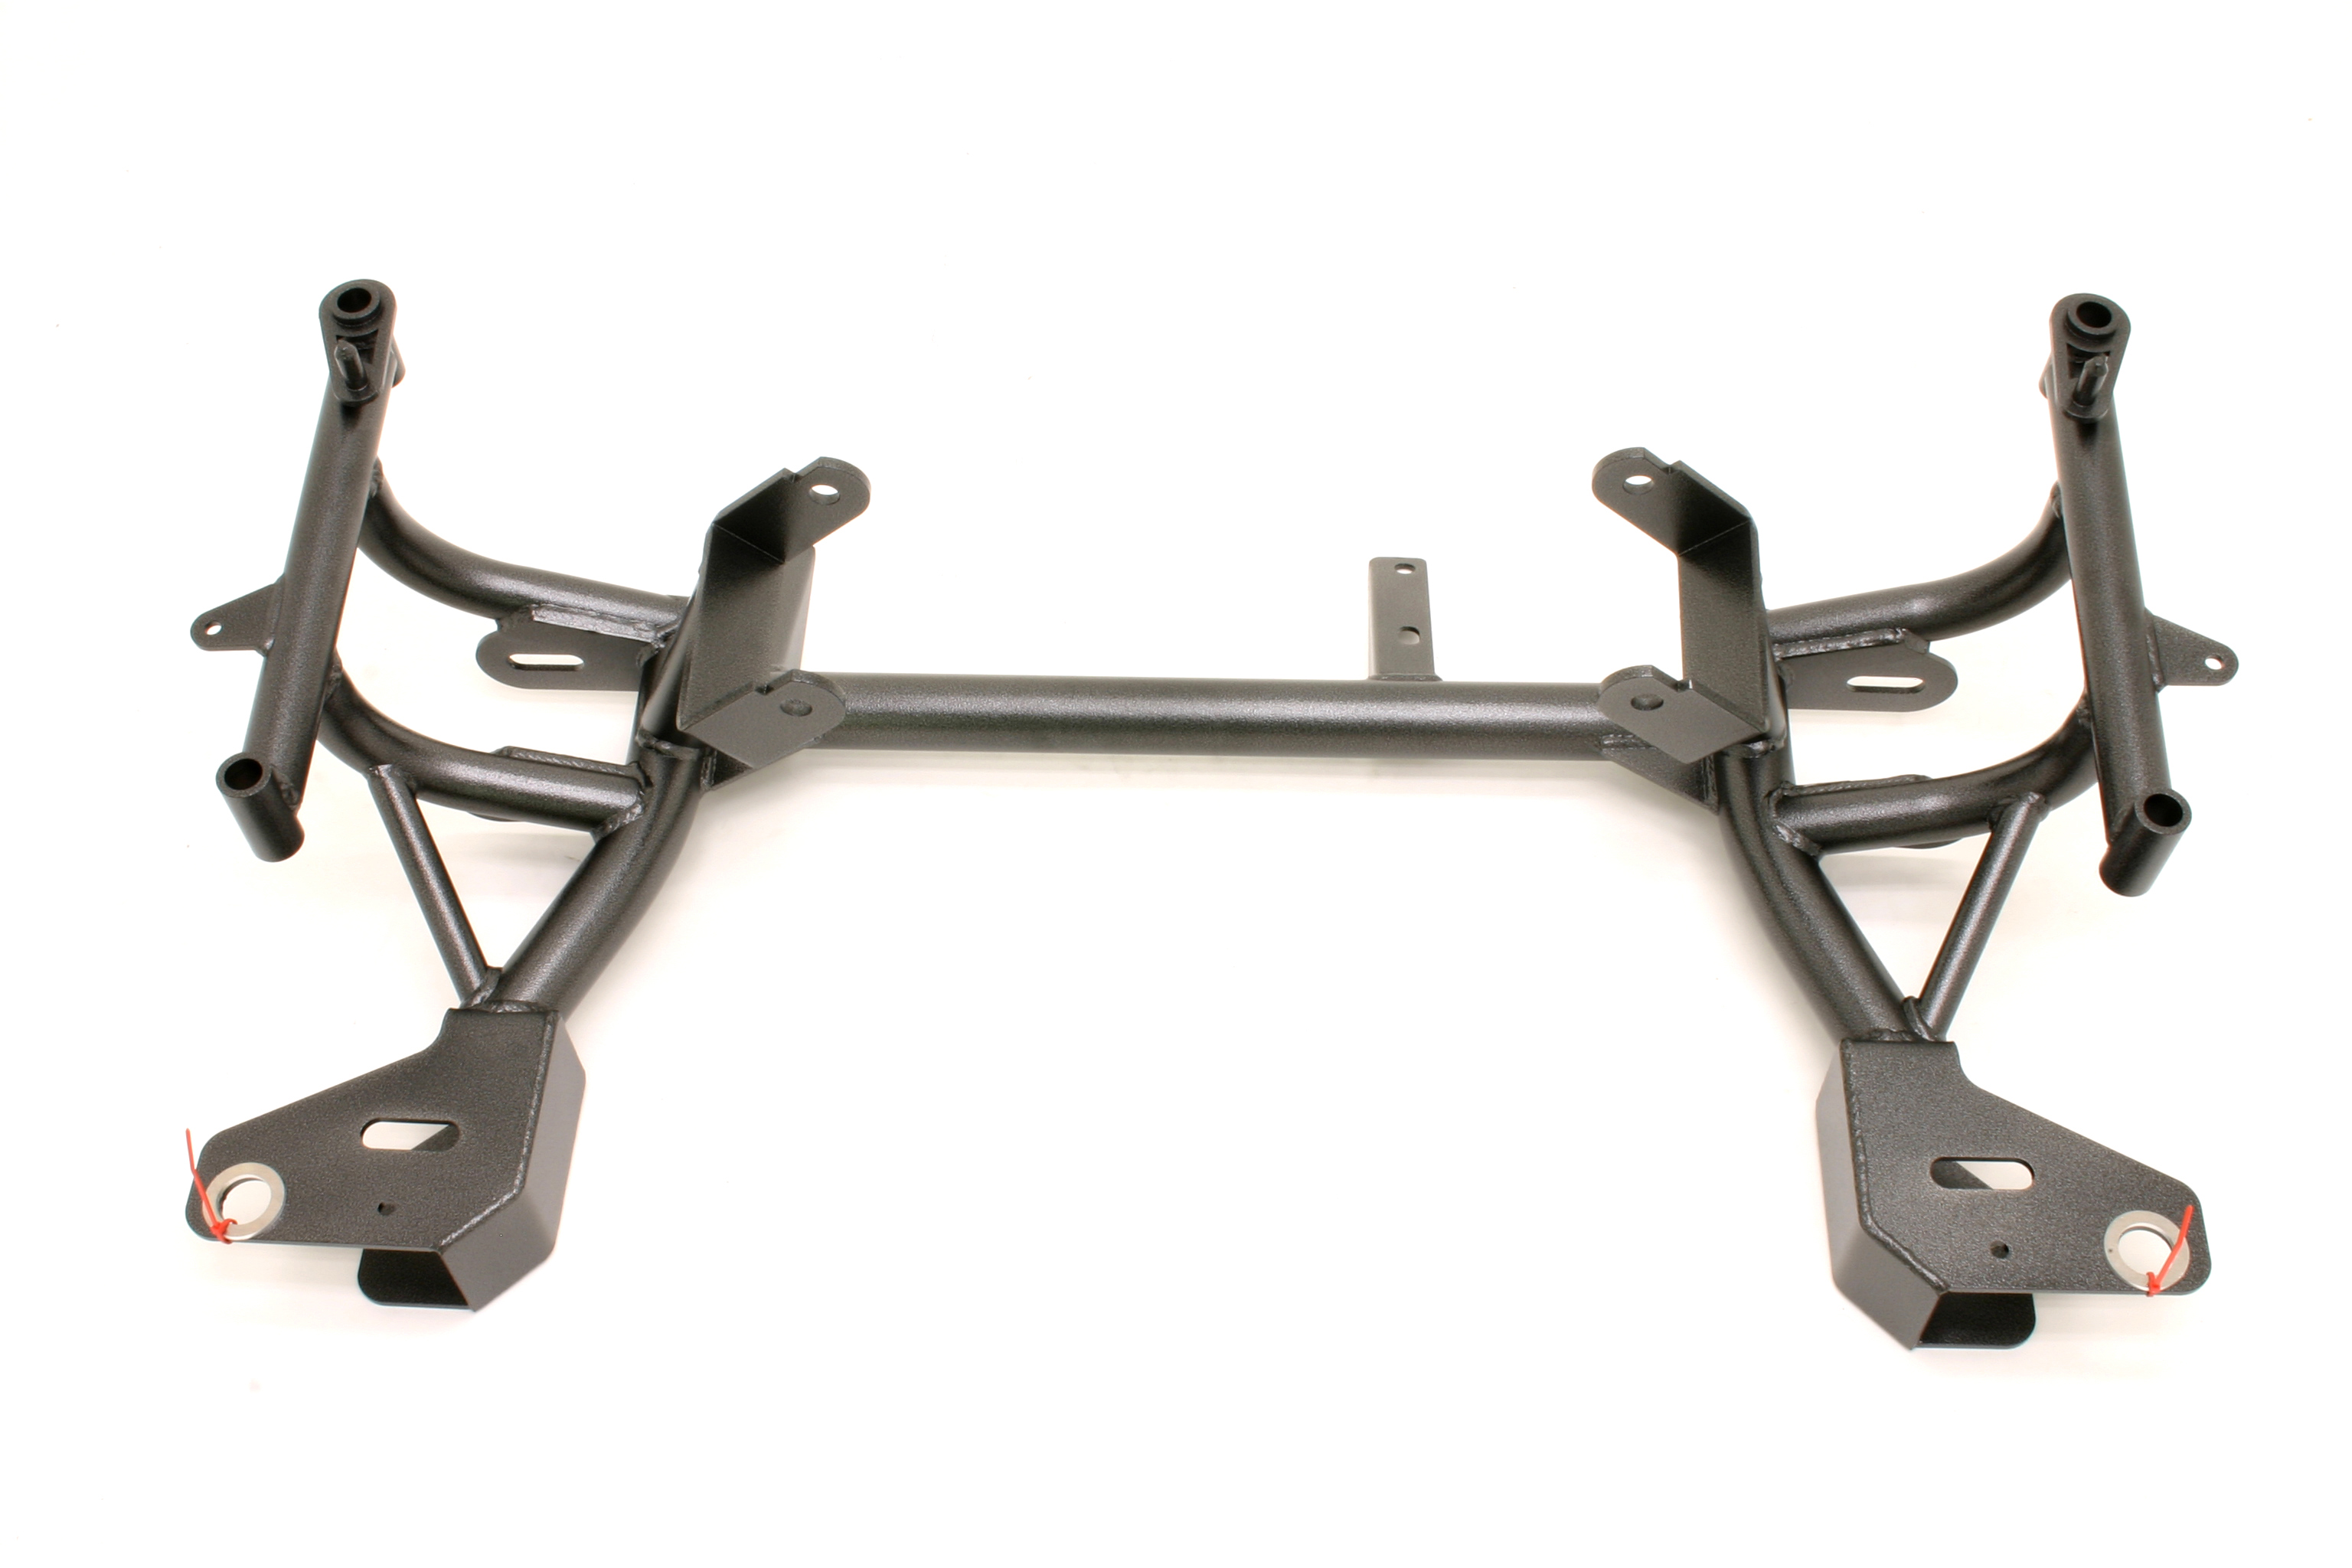 98-02 LS1 Fbody BMR Turbo Style High-Clearance KMember w/ LS1 Motor Mounts (For Pinto Style Manual Rack Mounts)